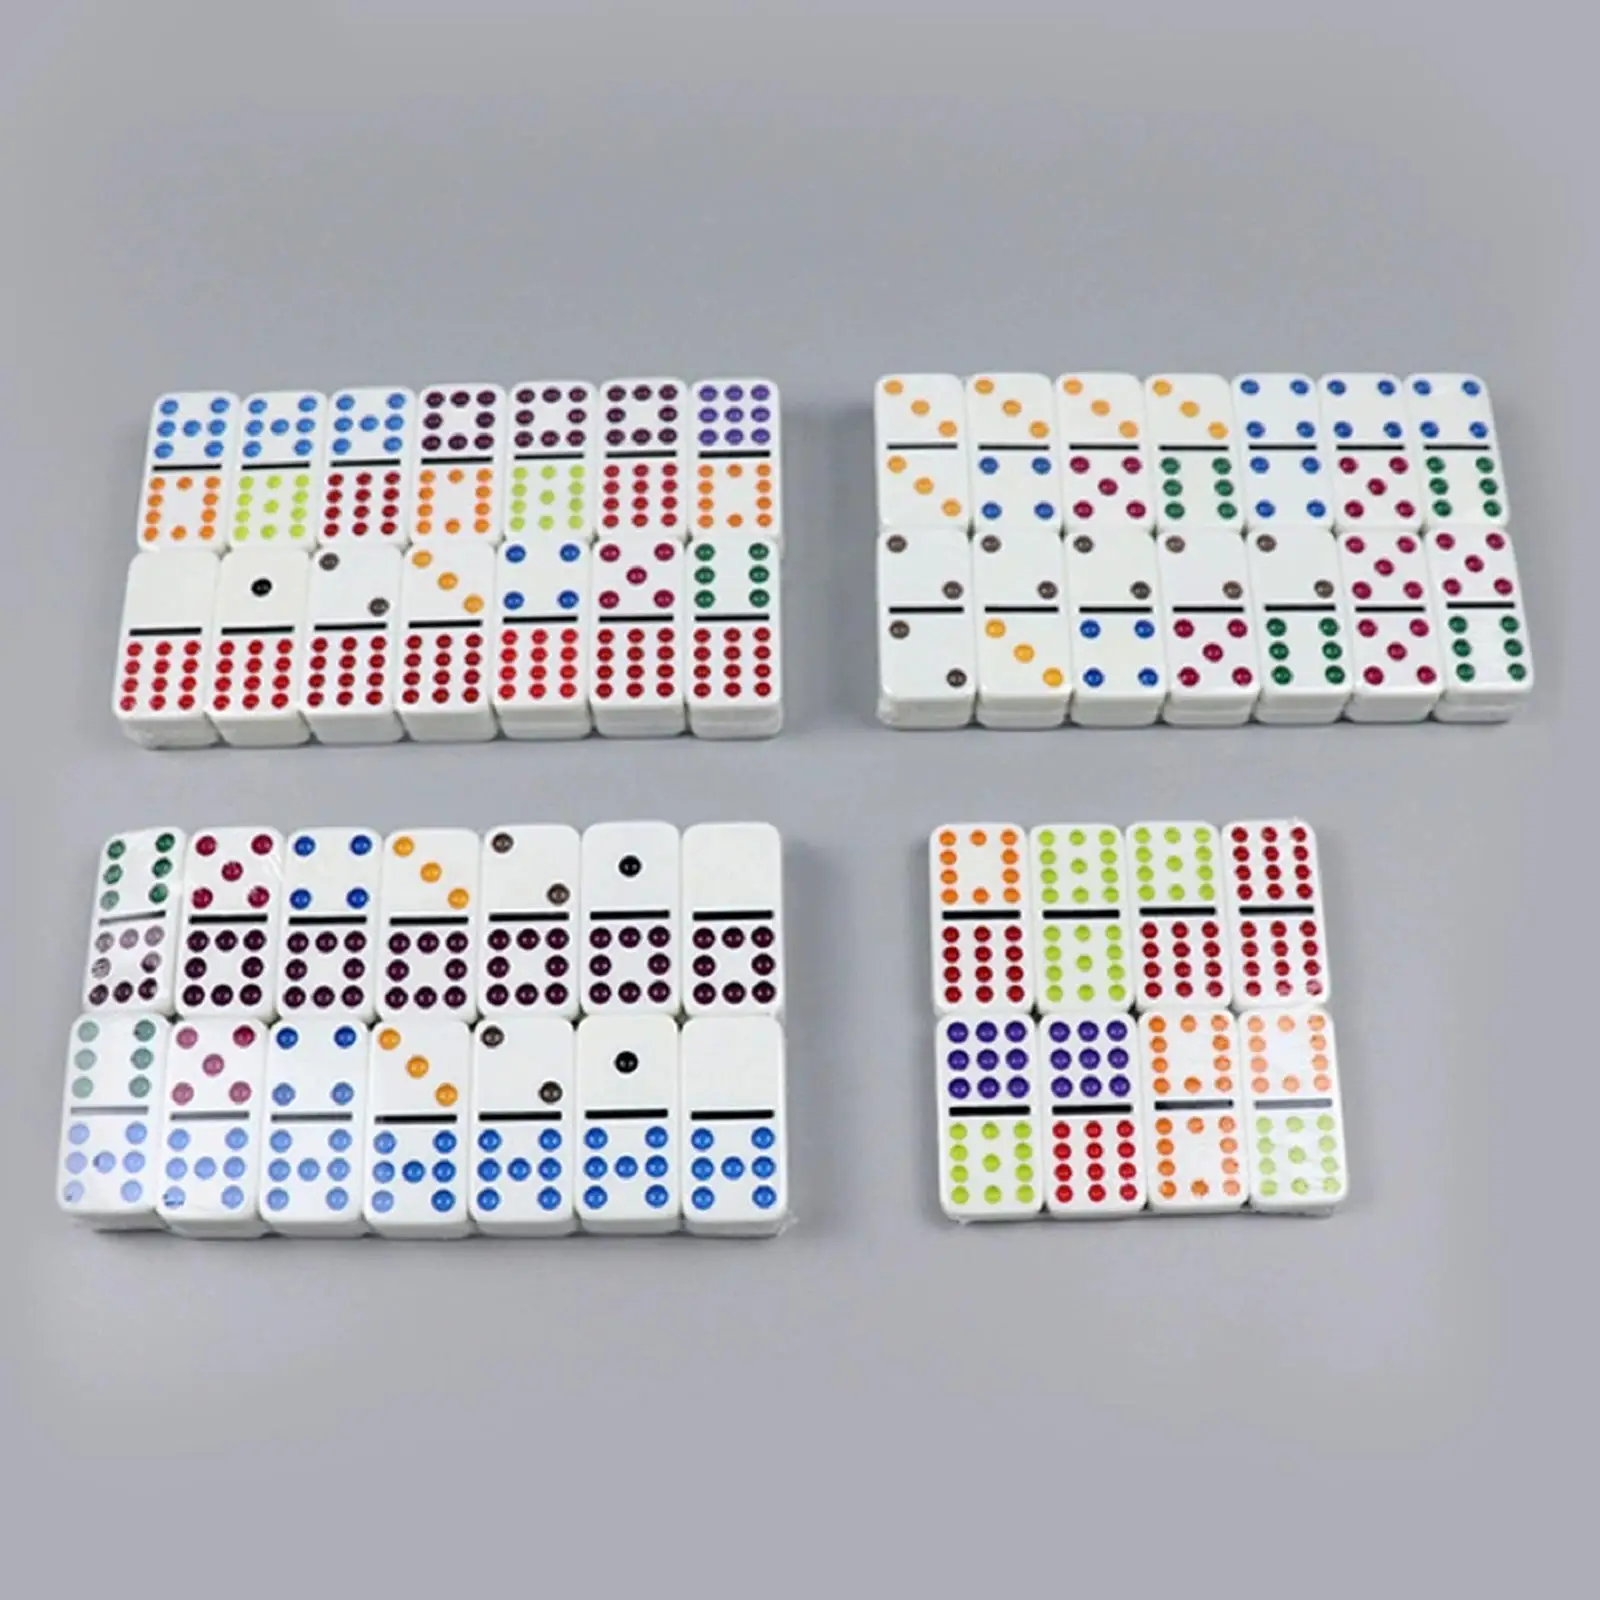 Mexican Train Dominoes Set Educational Toy 91Tiles Dominoes Board Game